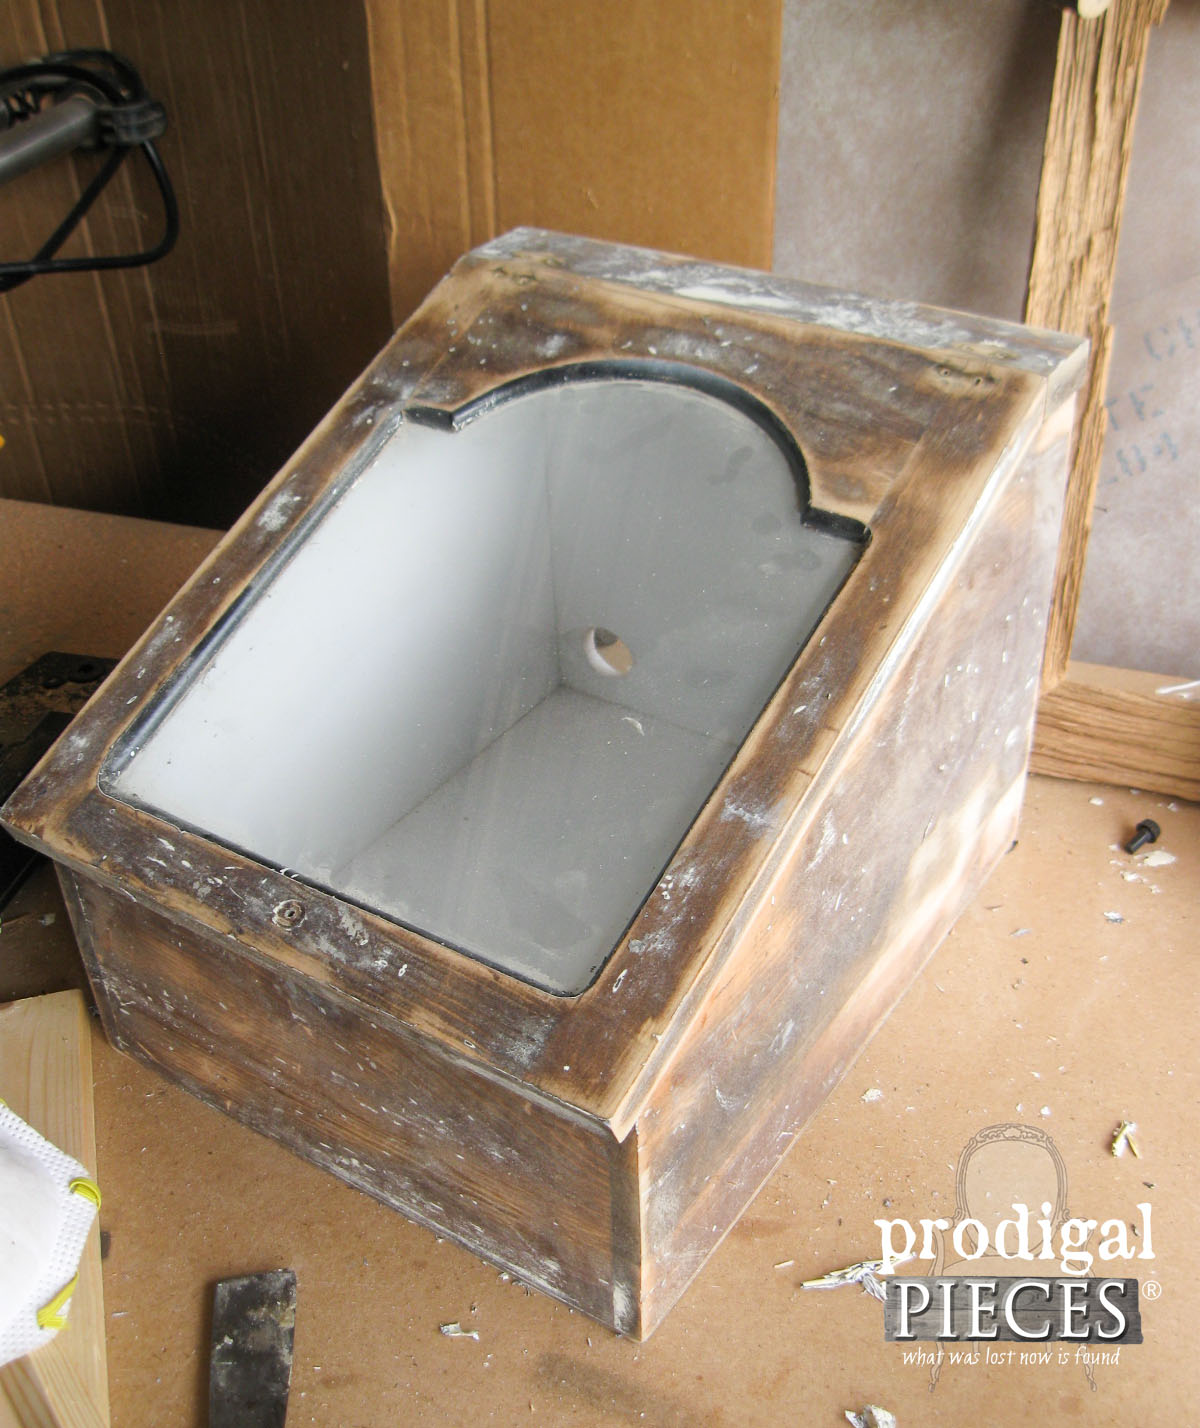 Vintage Bread Box Sanded Down for New Look | Prodigal Pieces | www.prodigalpieces.com